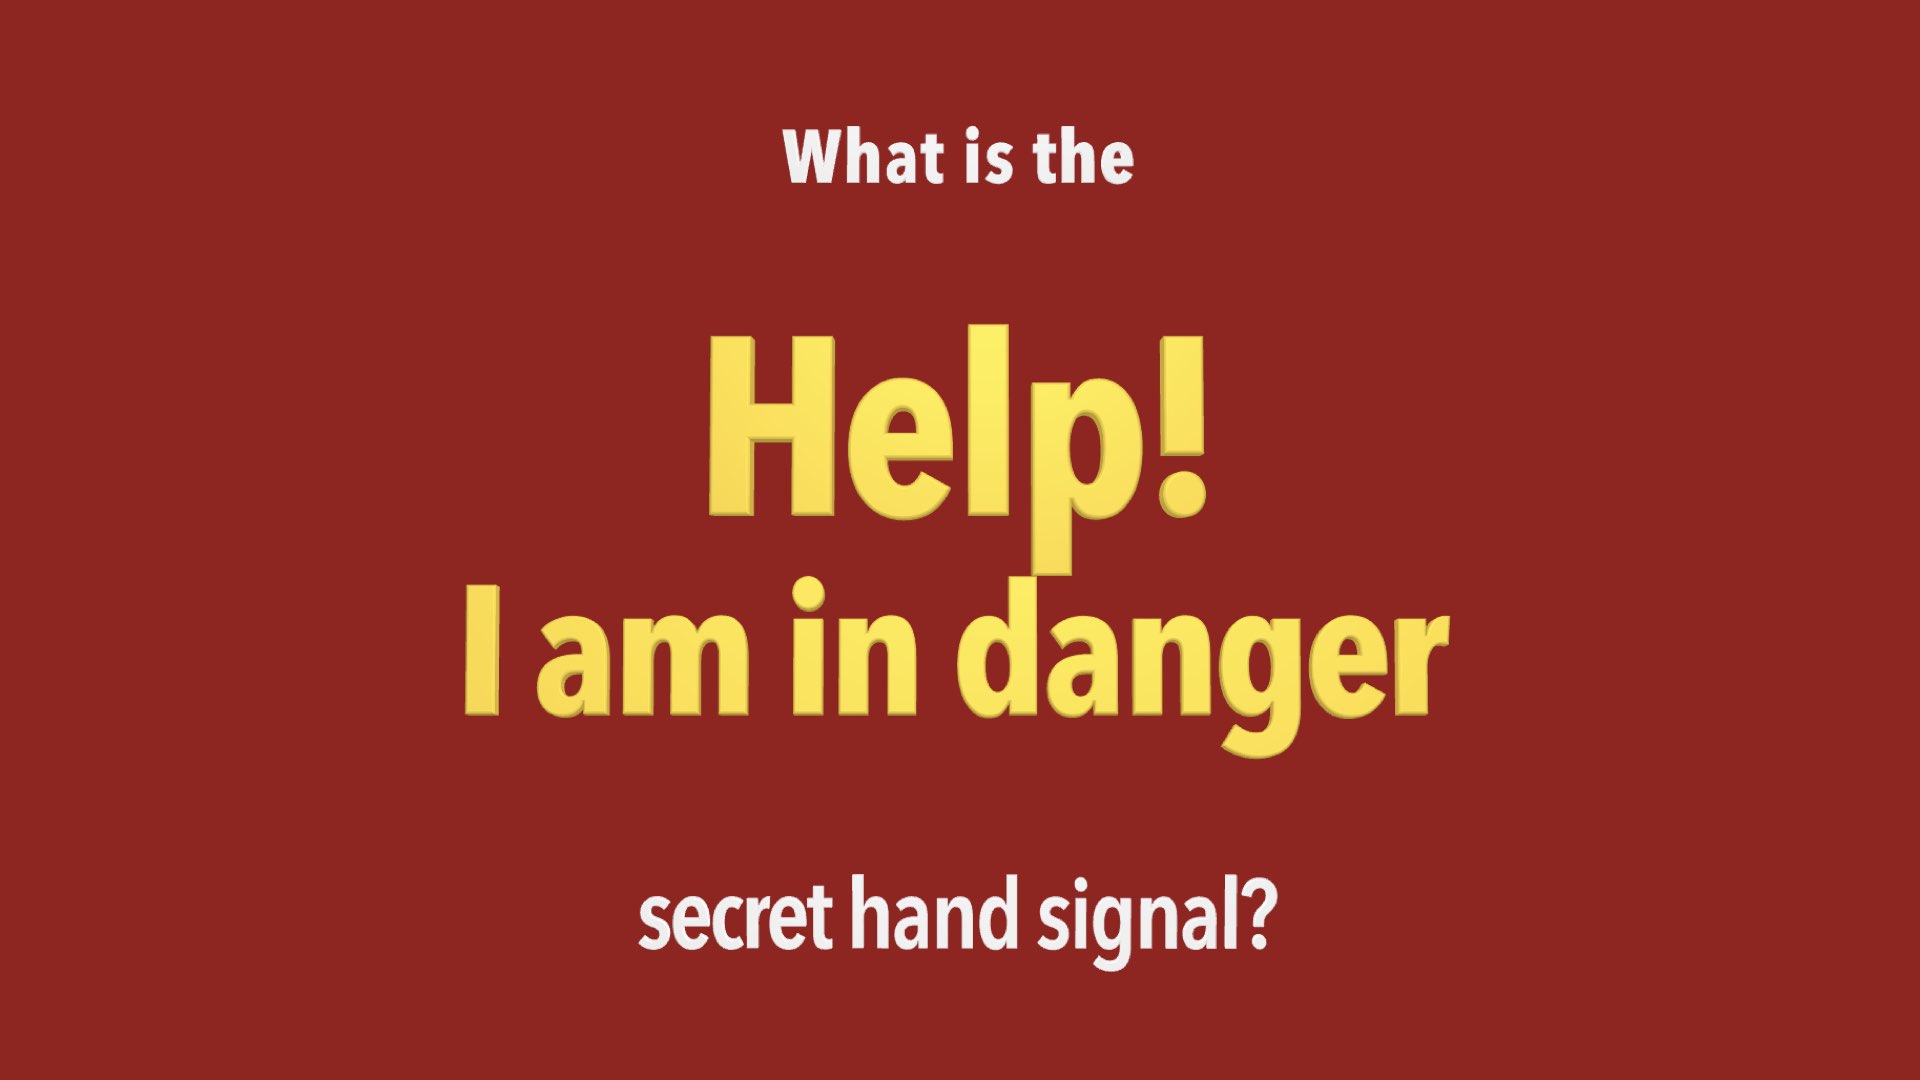 Do you know the life-saving “HELP I AM IN DANGER” silent hand signal?